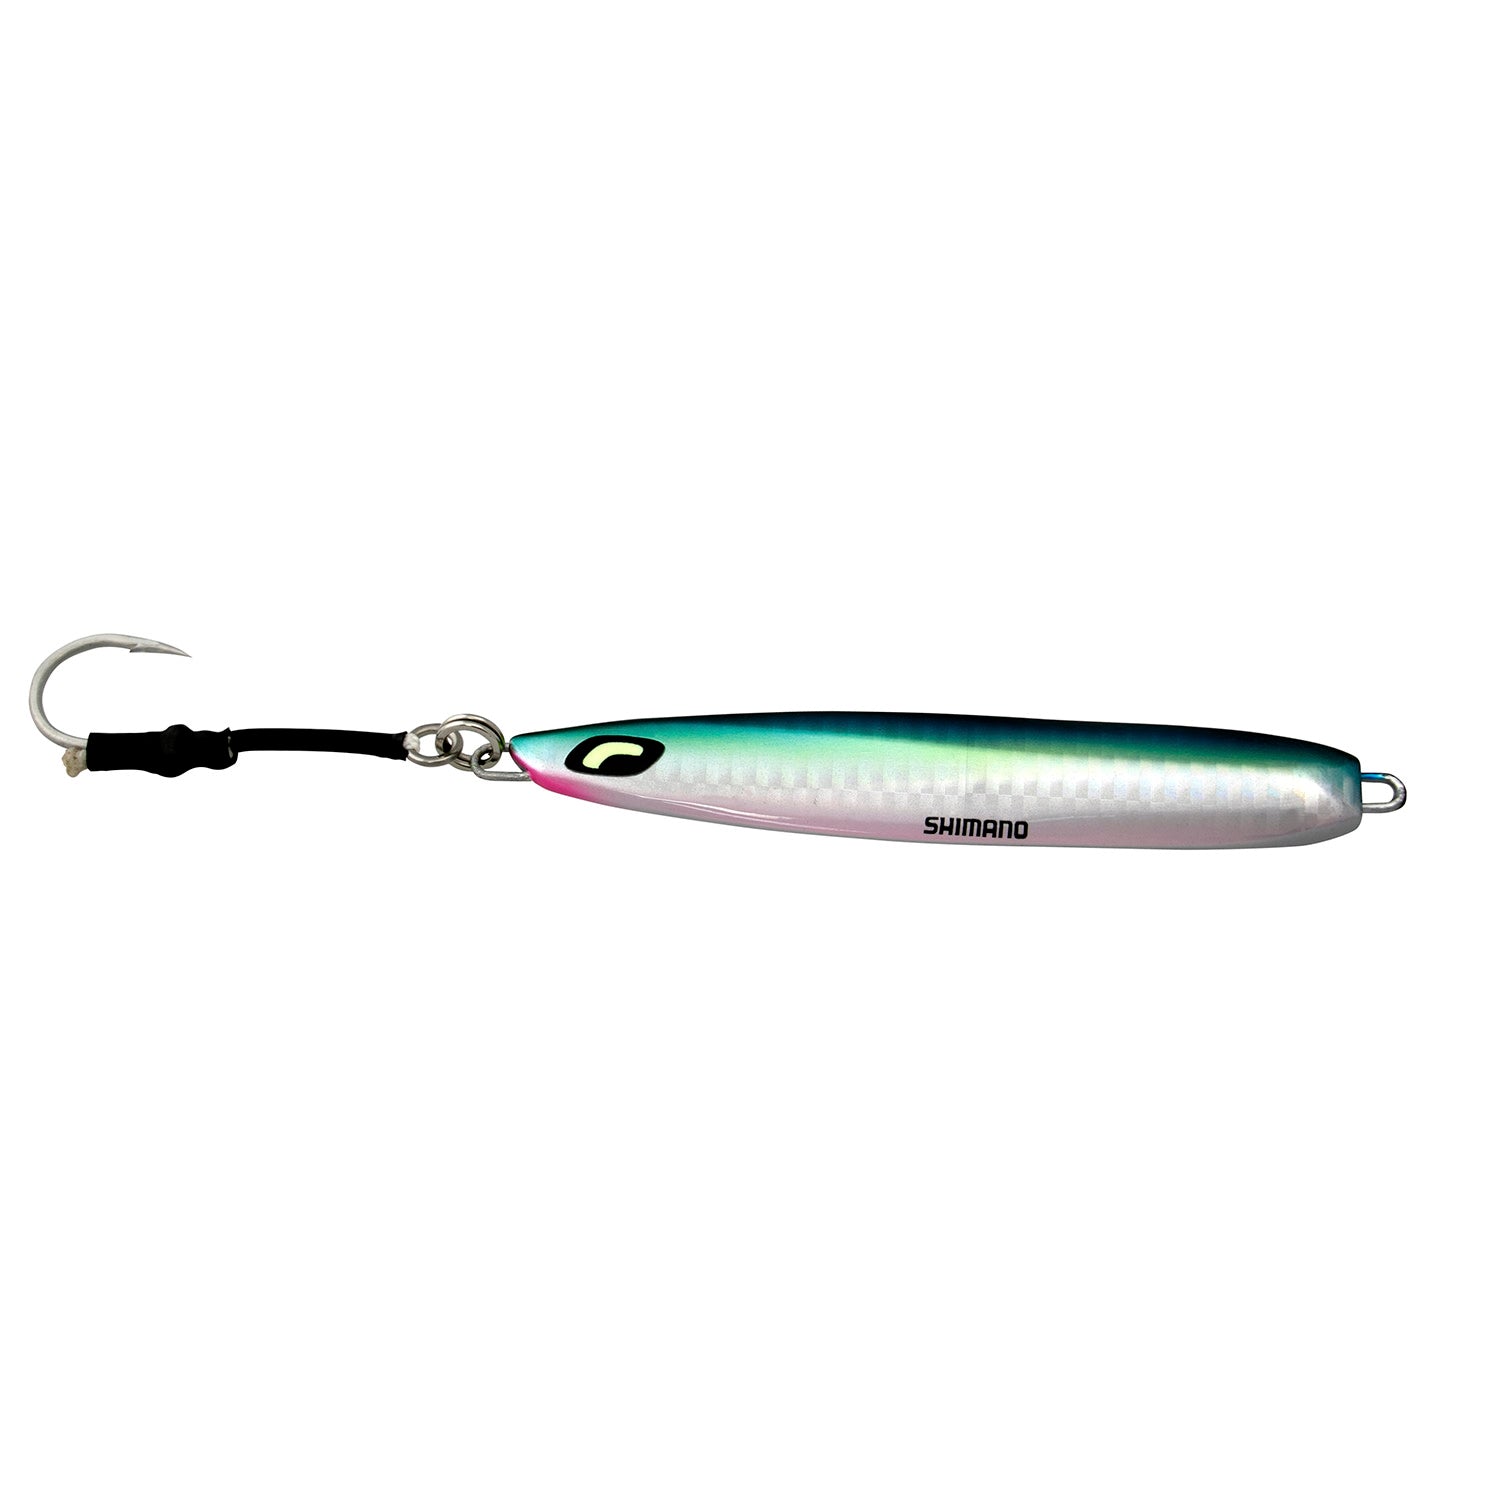 Shimano Butterfly Monarch Jig - 135g - Blue Pink